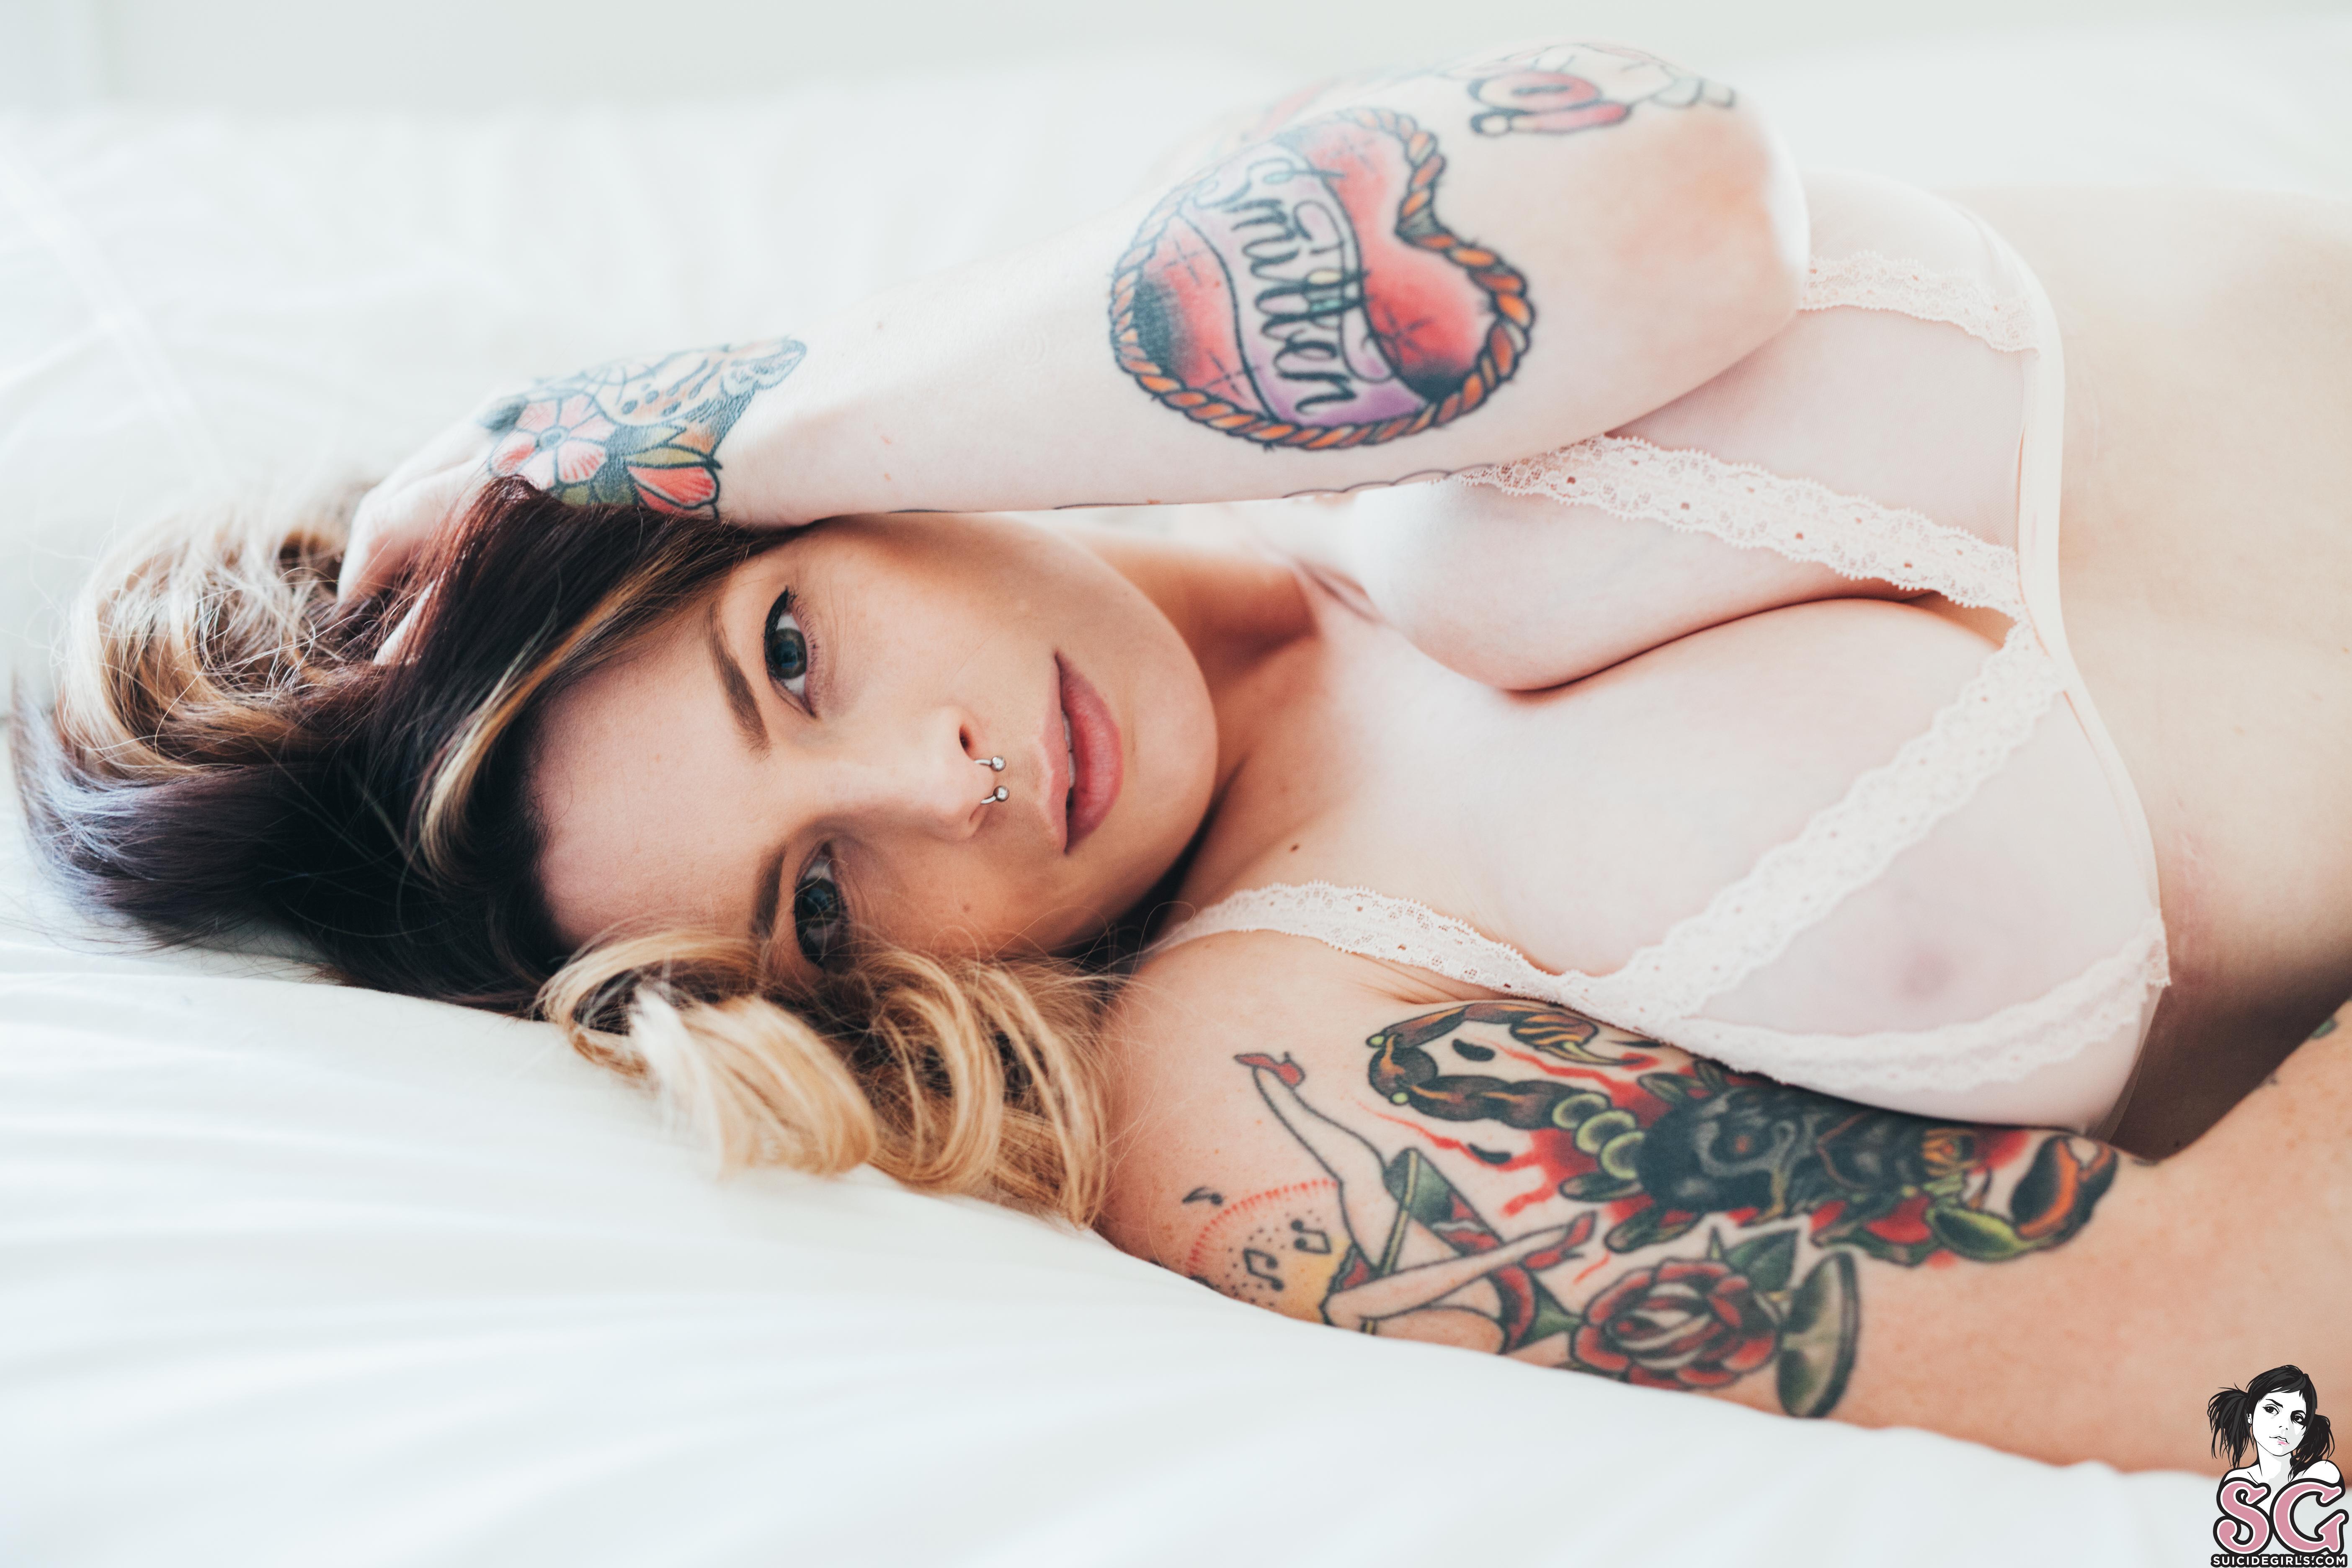 People 5616x3744 Suicide Girls brunette bedroom bed tattoo Peggysue Suicide white lingerie women